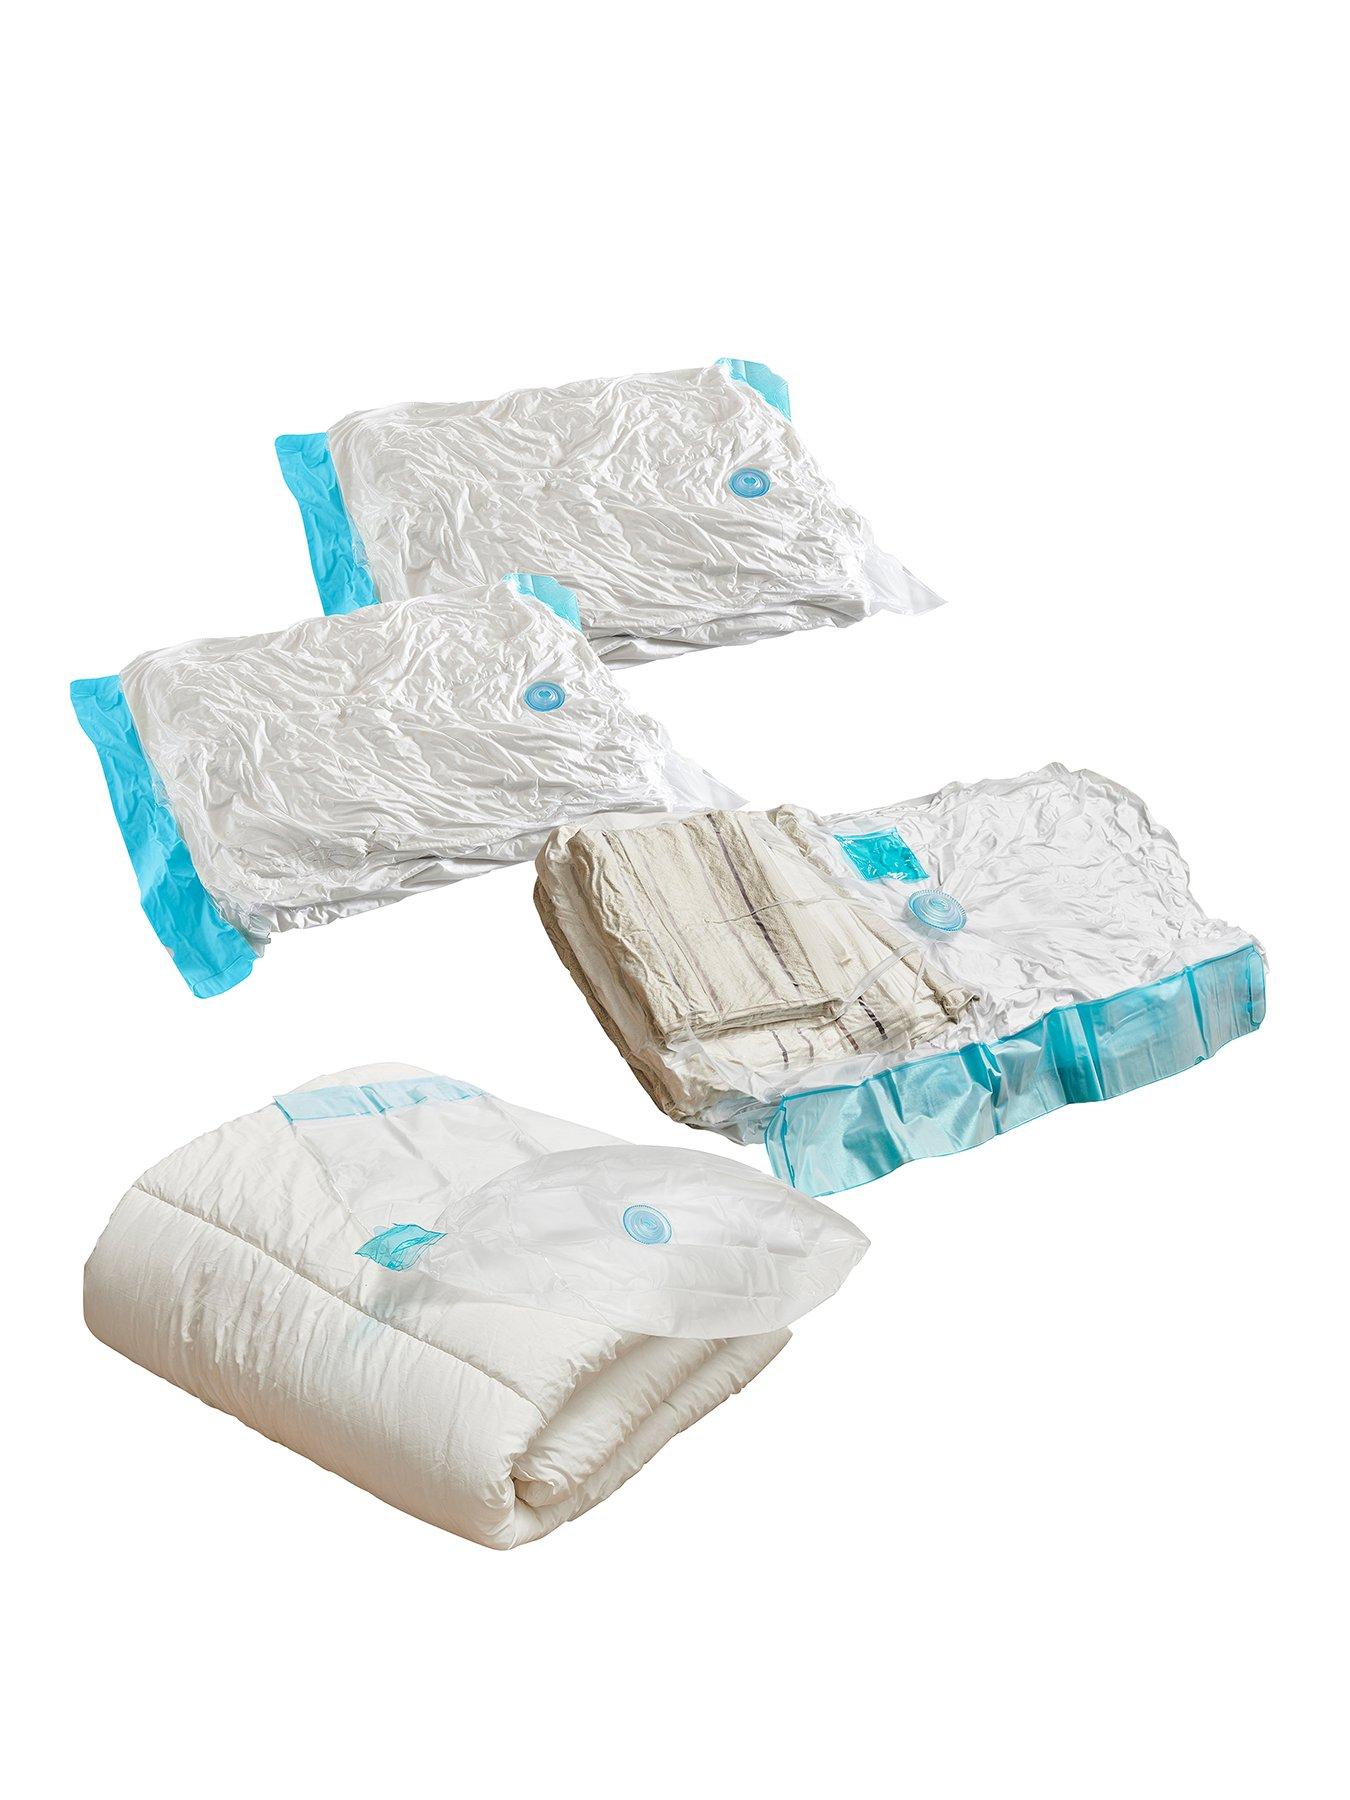 large storage bags for bedding